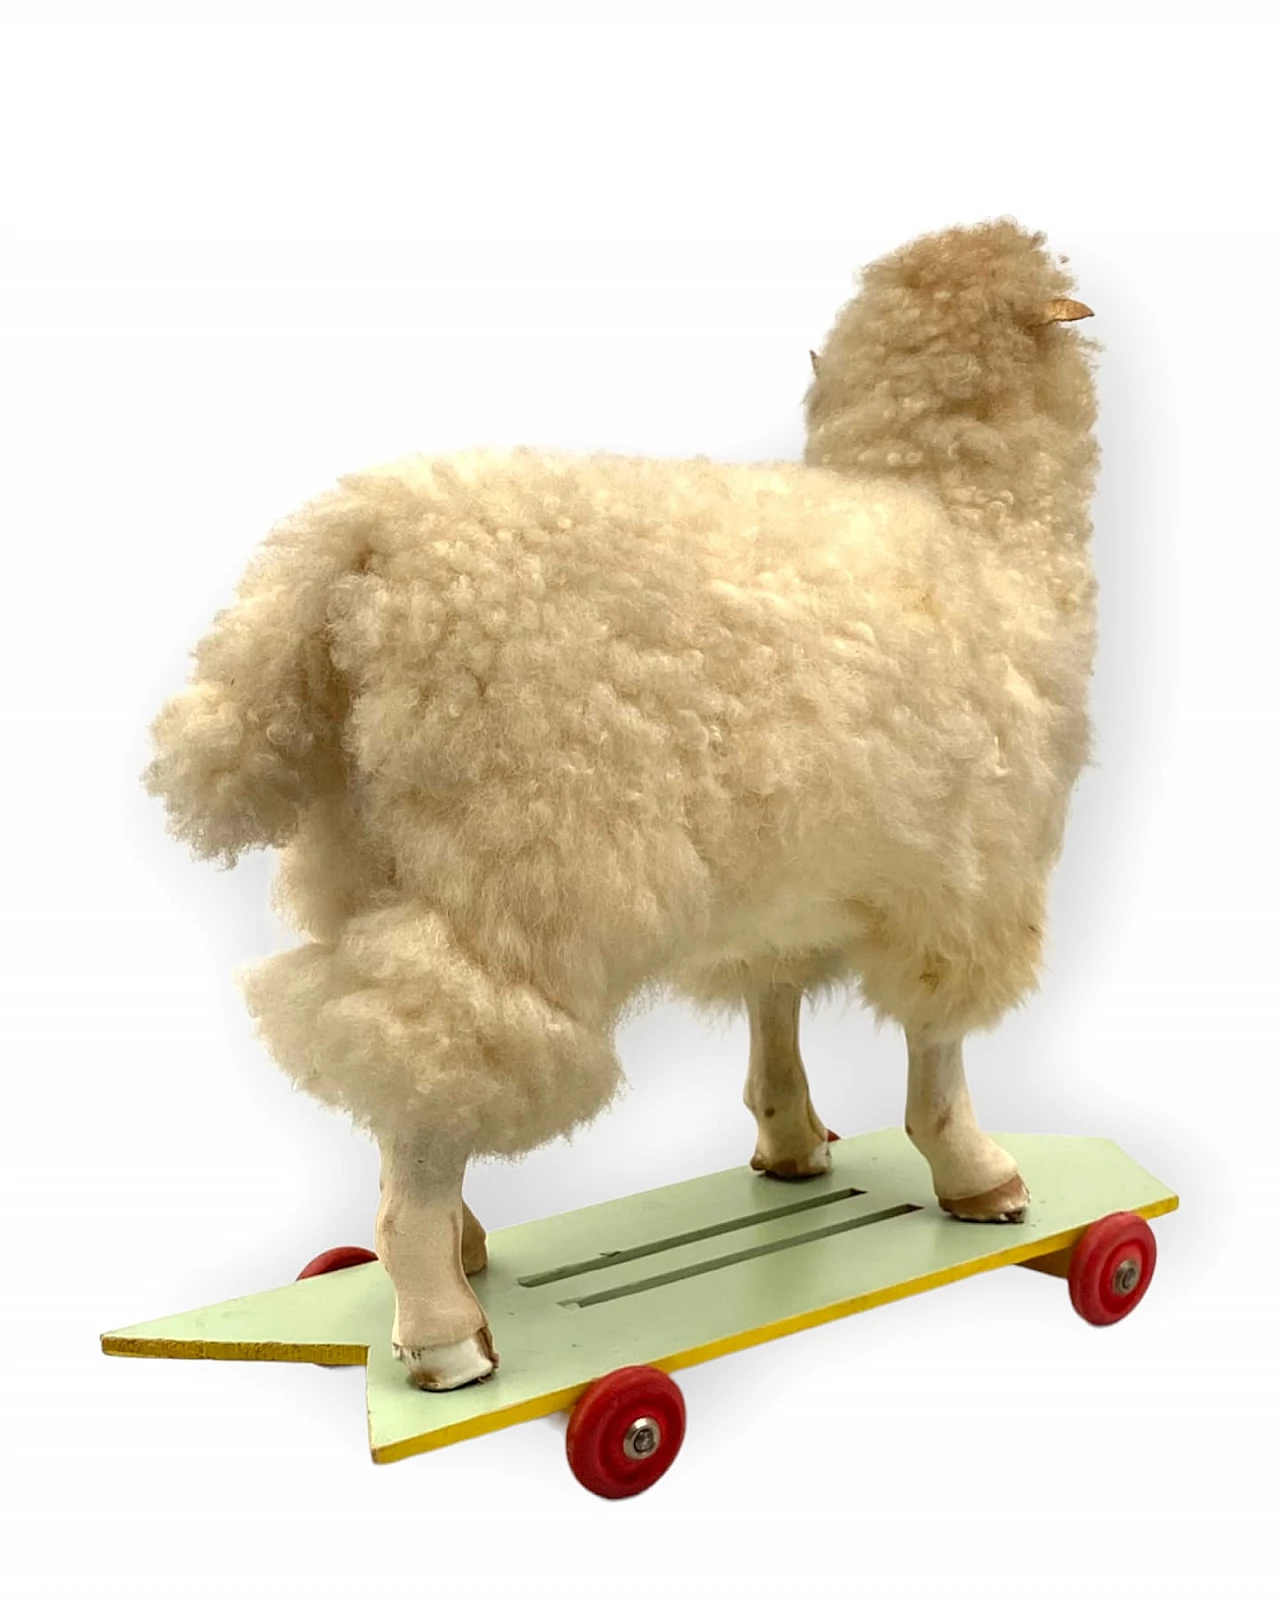 Wool and wood toy sheep with wheels 17